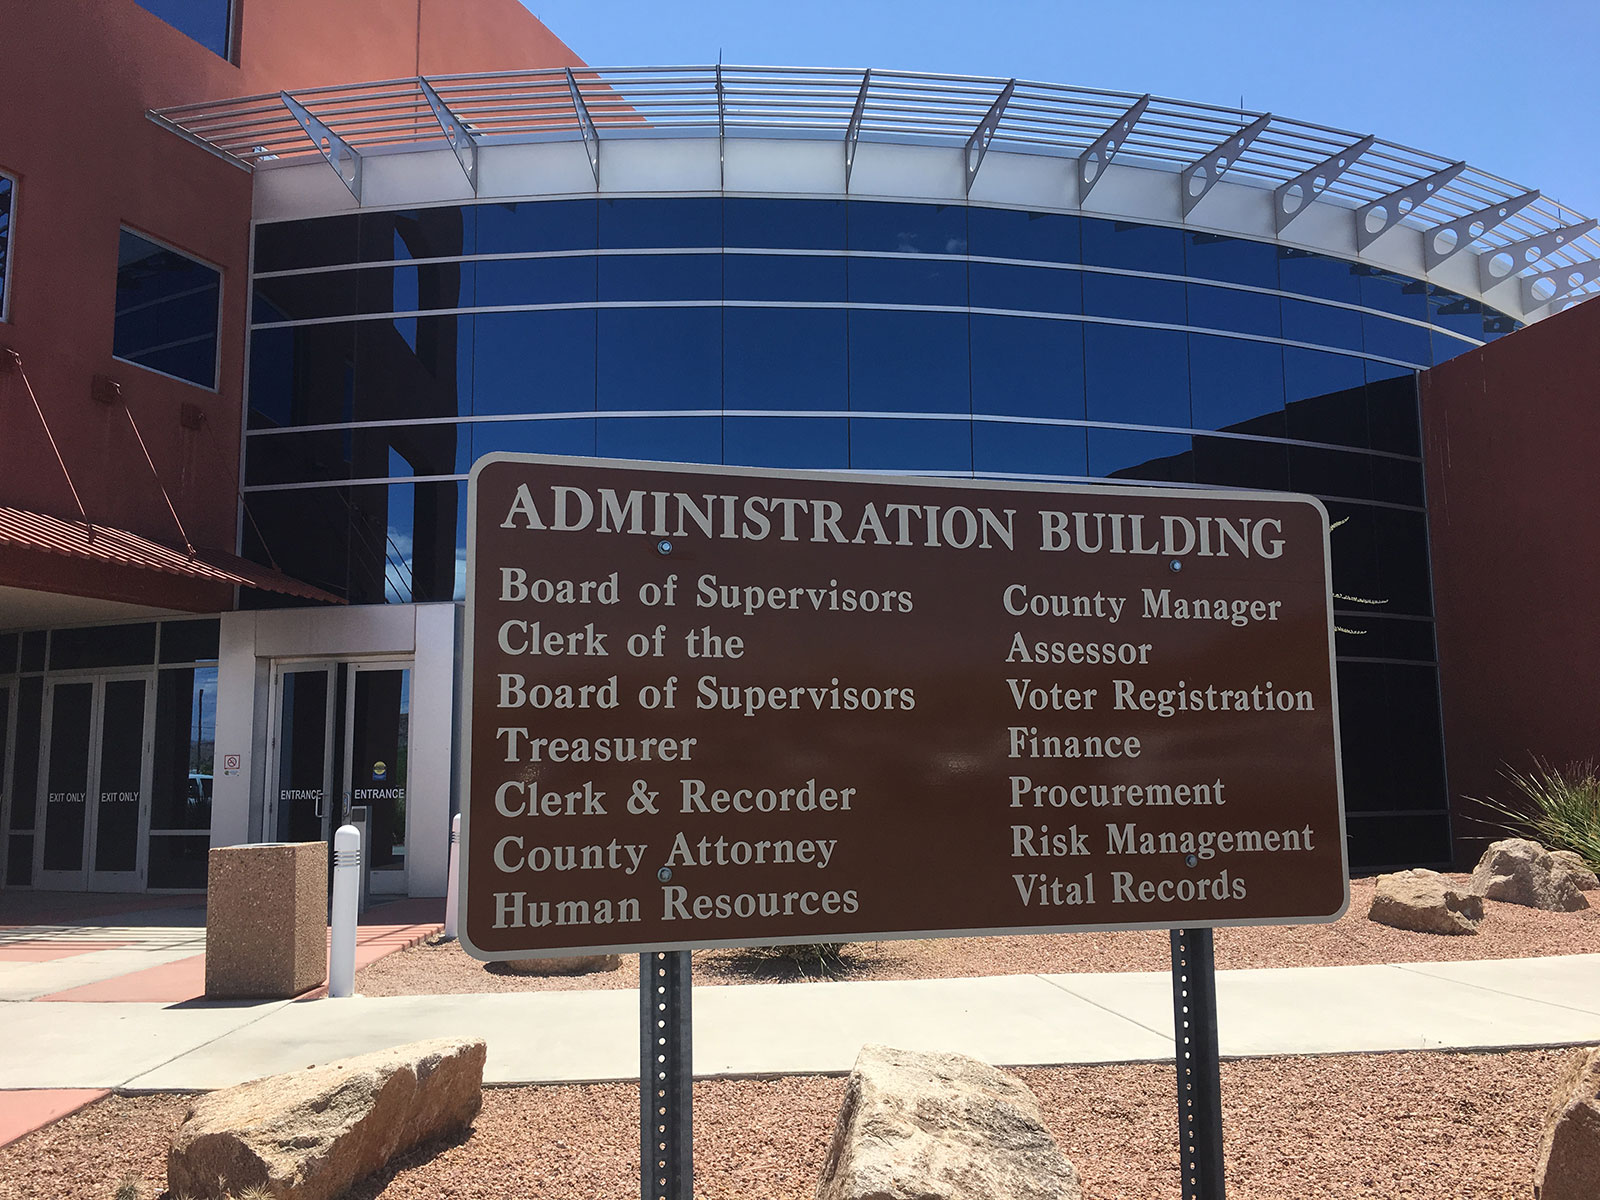 Mohave County health department wants $240K for vaccines Kingman